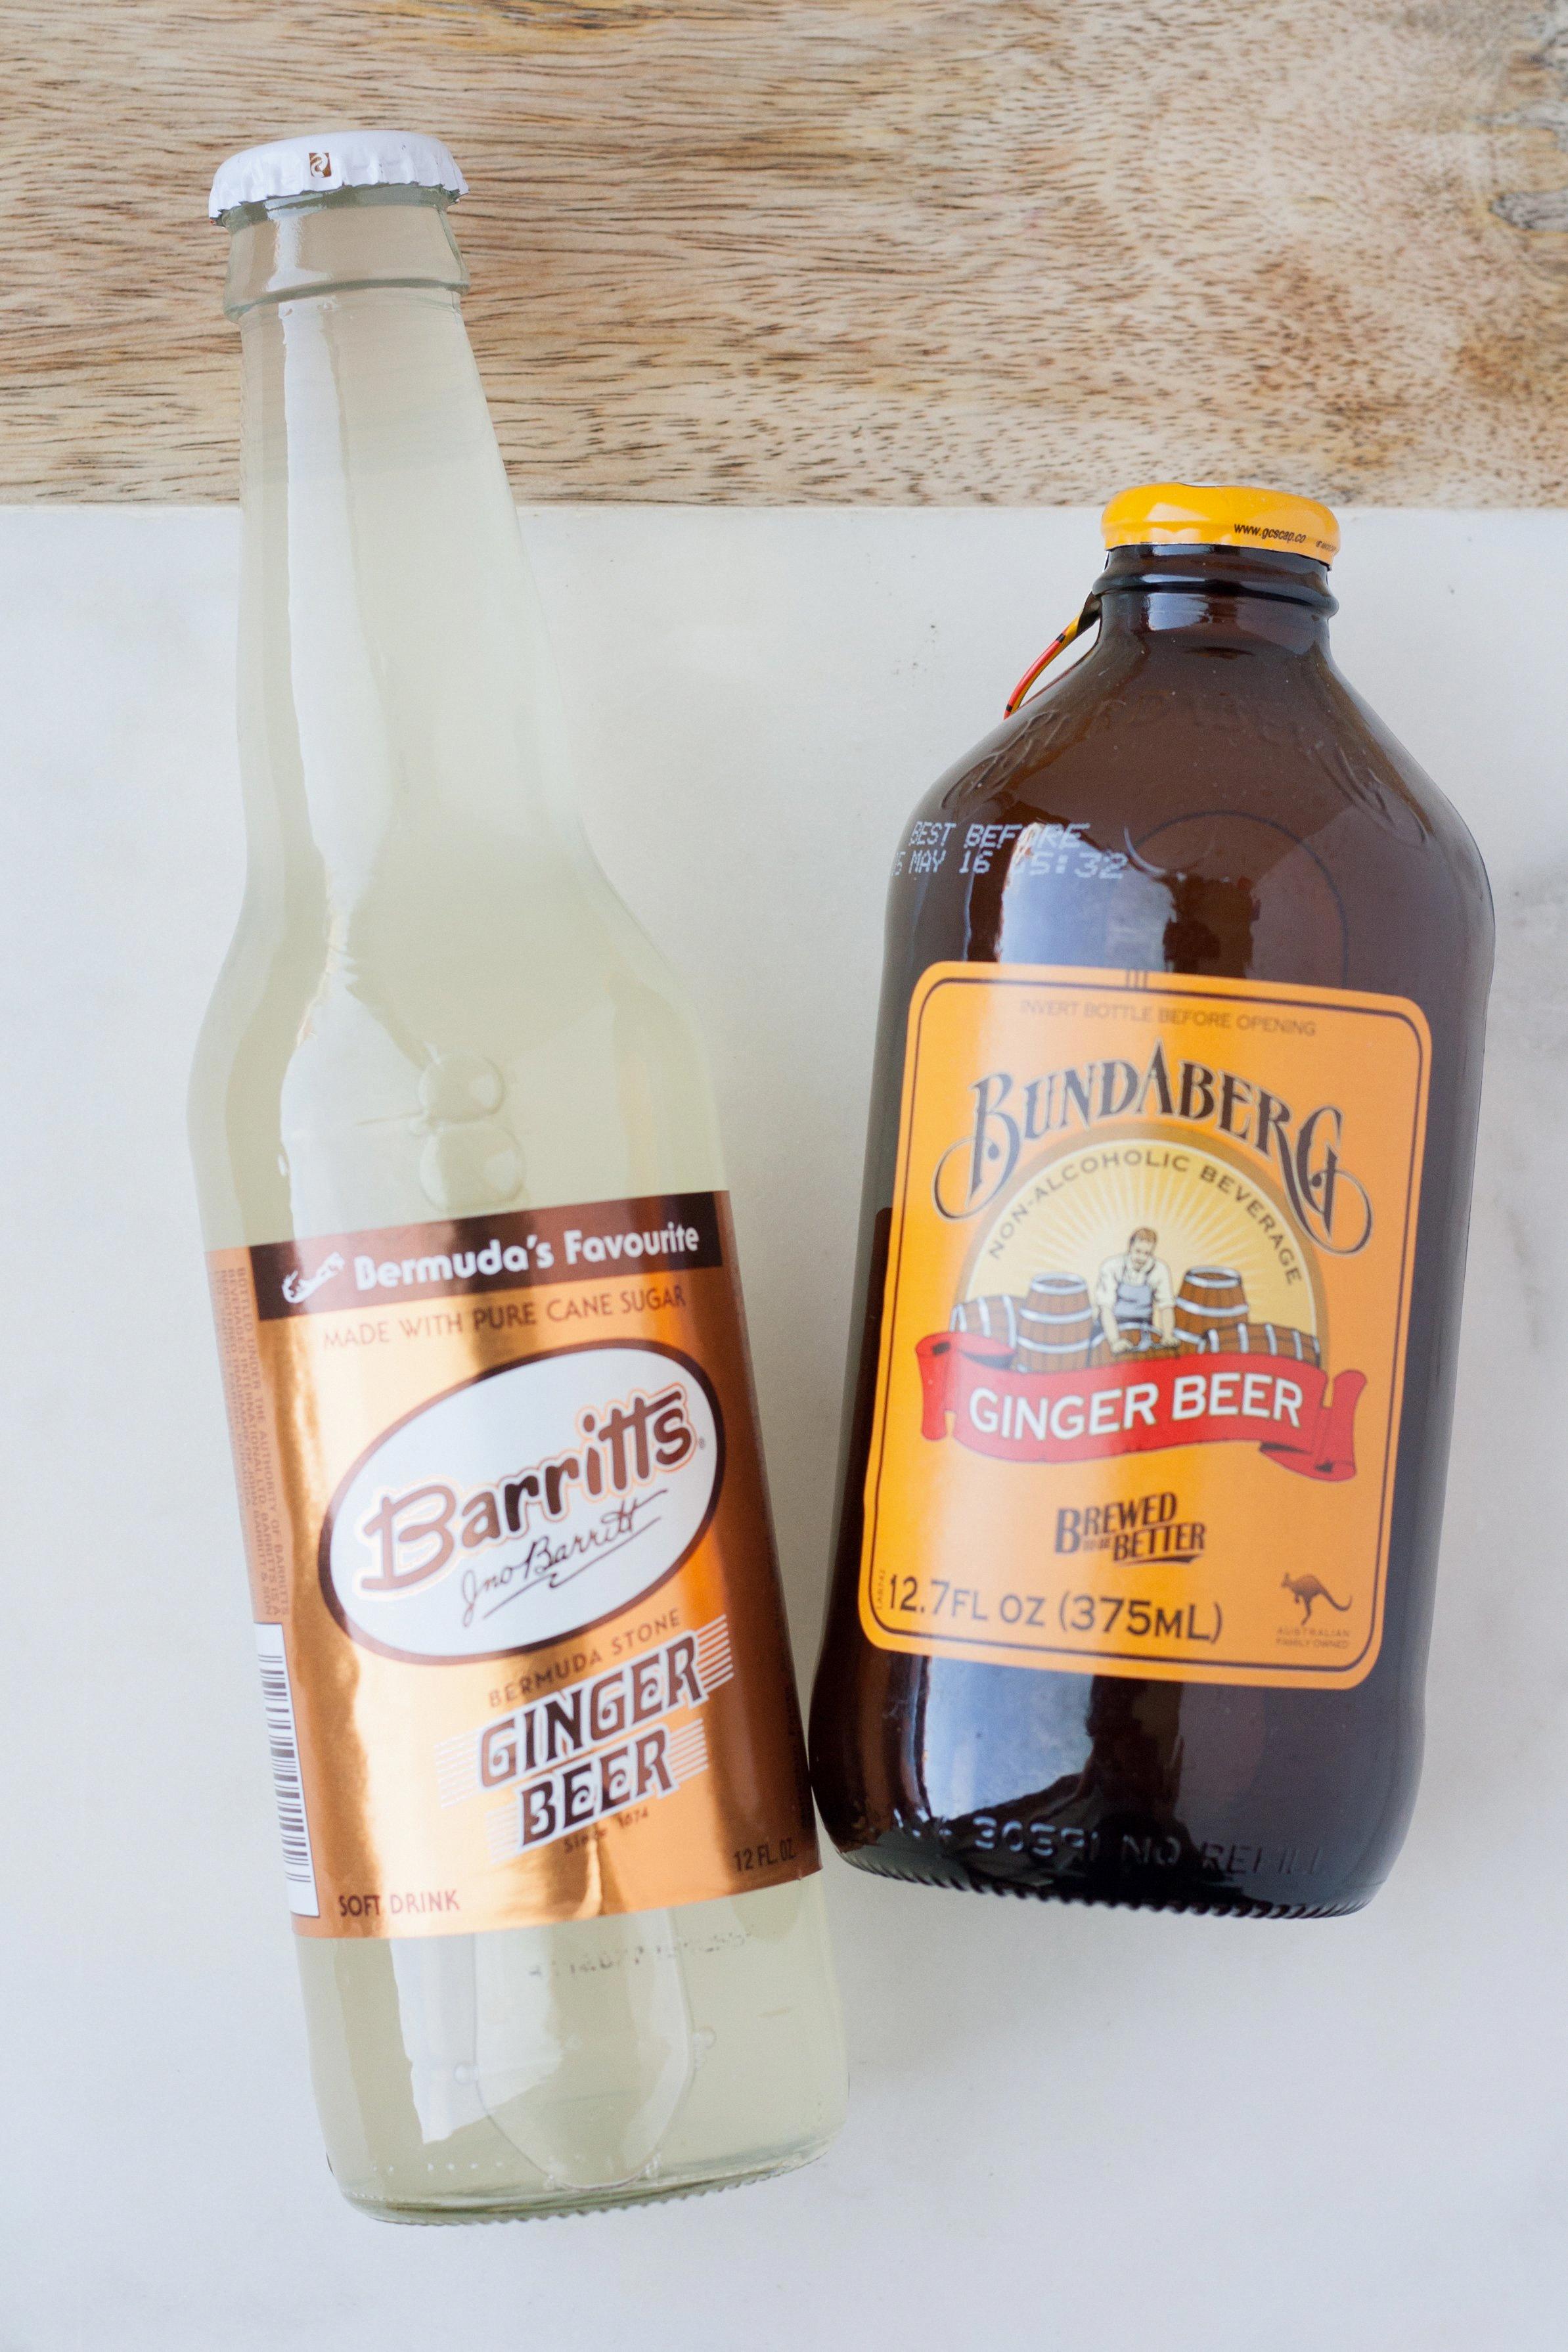 is ginger beer alcohol free